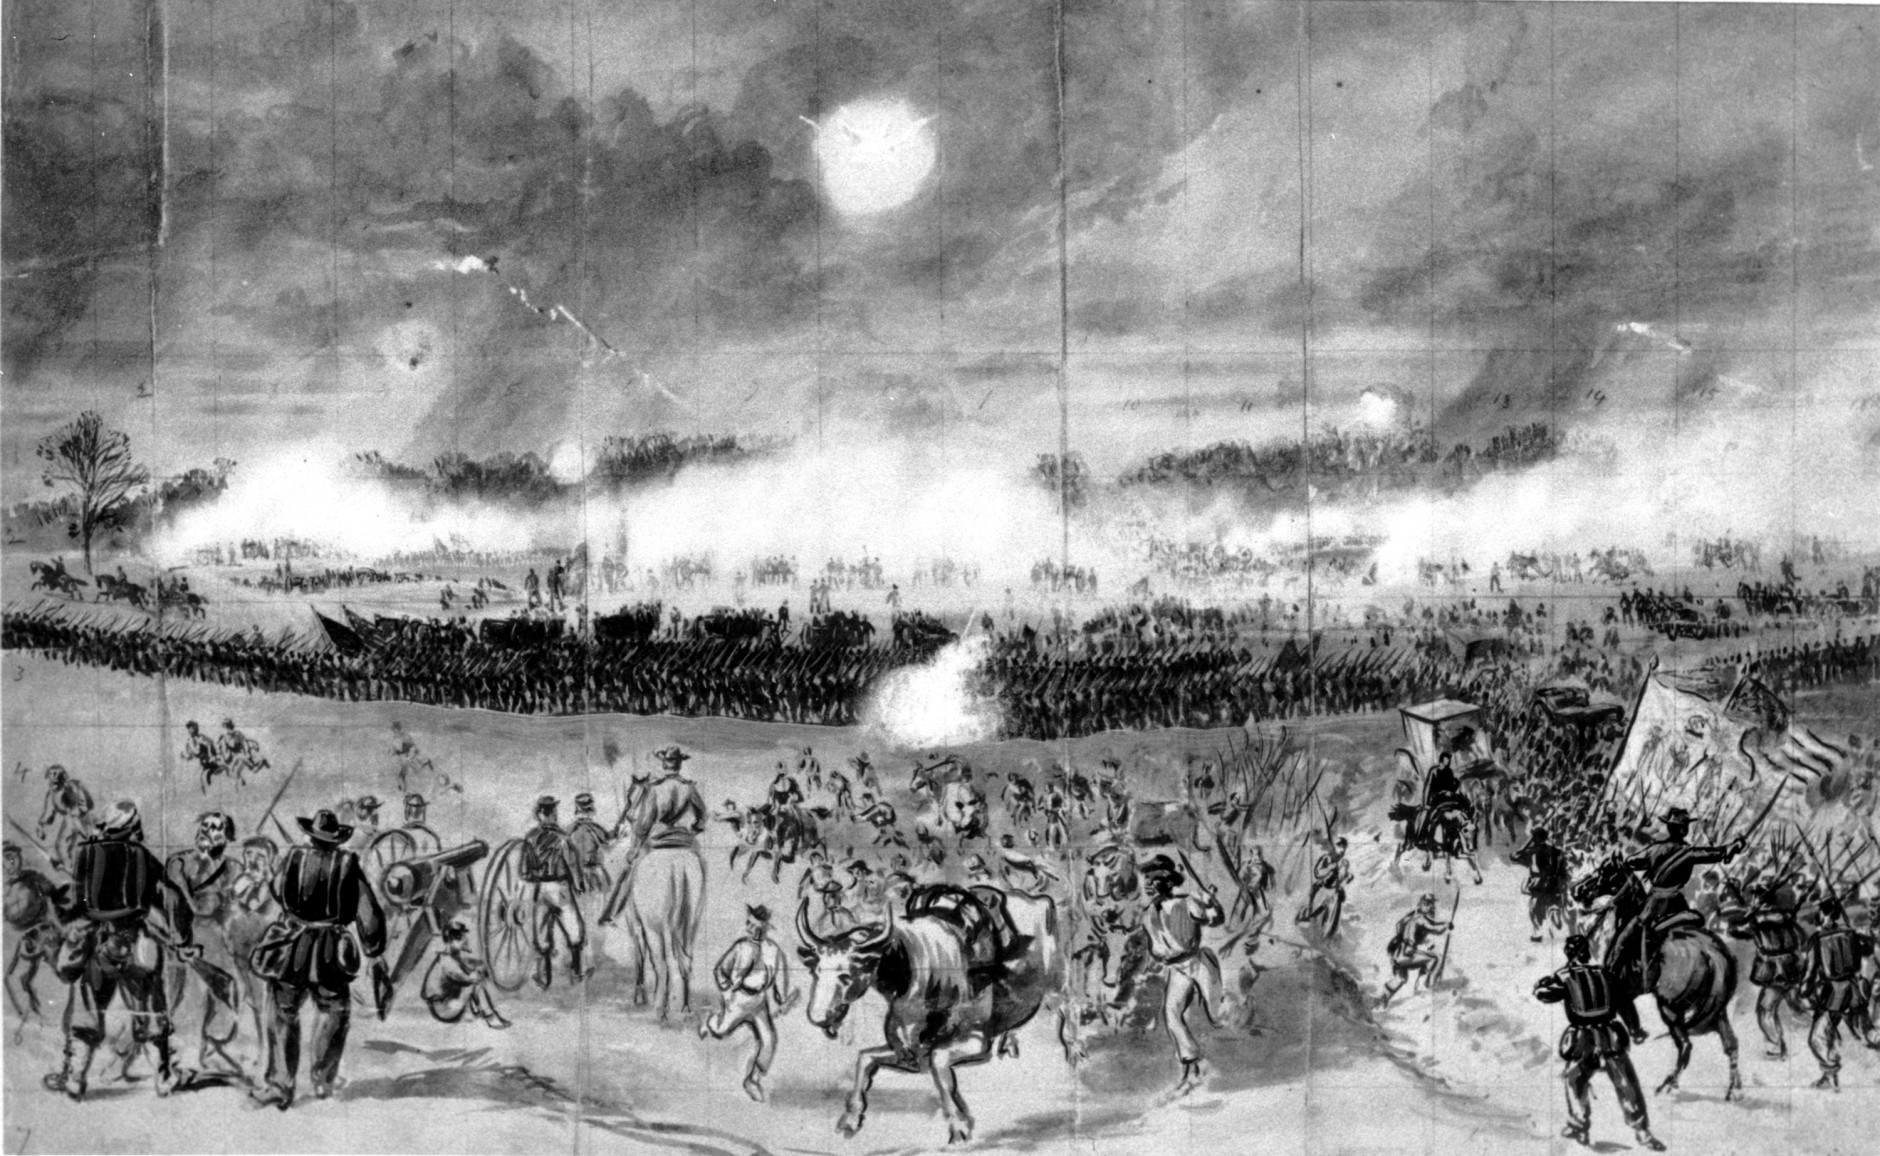 This drawing from the American Civil War shows the action at the Battle of Chancellorsville in Va. on May 2, 1863. Animals and remnants of the Union XI Corps stream to the rear as the Union II Corps advances to meet the flank attack of the Confederates. Chancellorsville marked another defeat for the Union Army of the Potomac, under Gen. Joseph Hooker. (AP Photo)